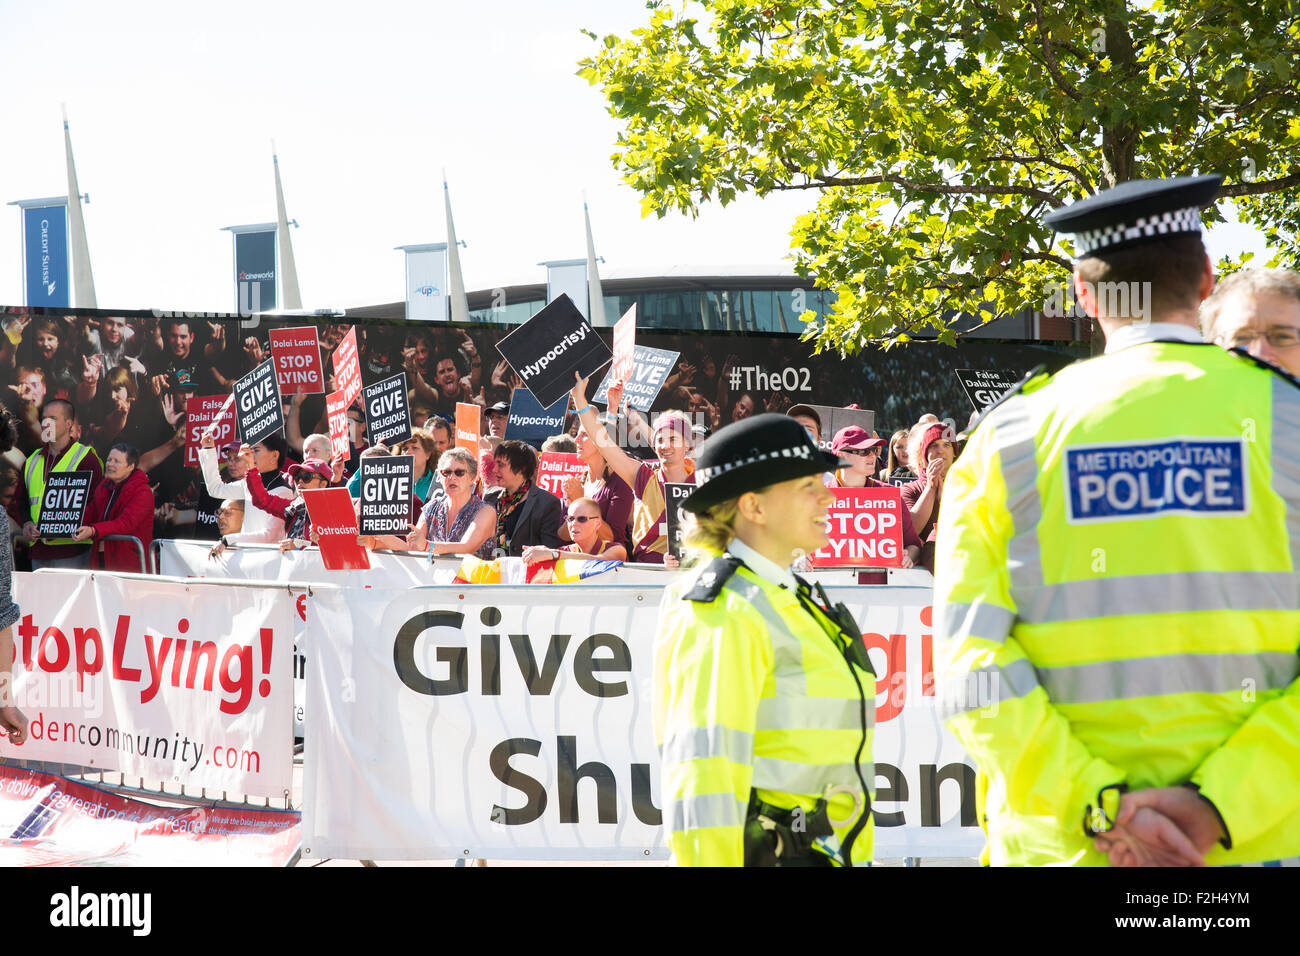 London, UK. 19th September, 2015. Protest organised by International shugden community outside O2 arena before the appearance of the Dalai Lama part of his UK Tour.Report show religious intolerance and segregation practices, including signs above shops and medical facilities refusing service to people of shugden faith. Credit:  Pete Lusabia/Alamy Live News Stock Photo